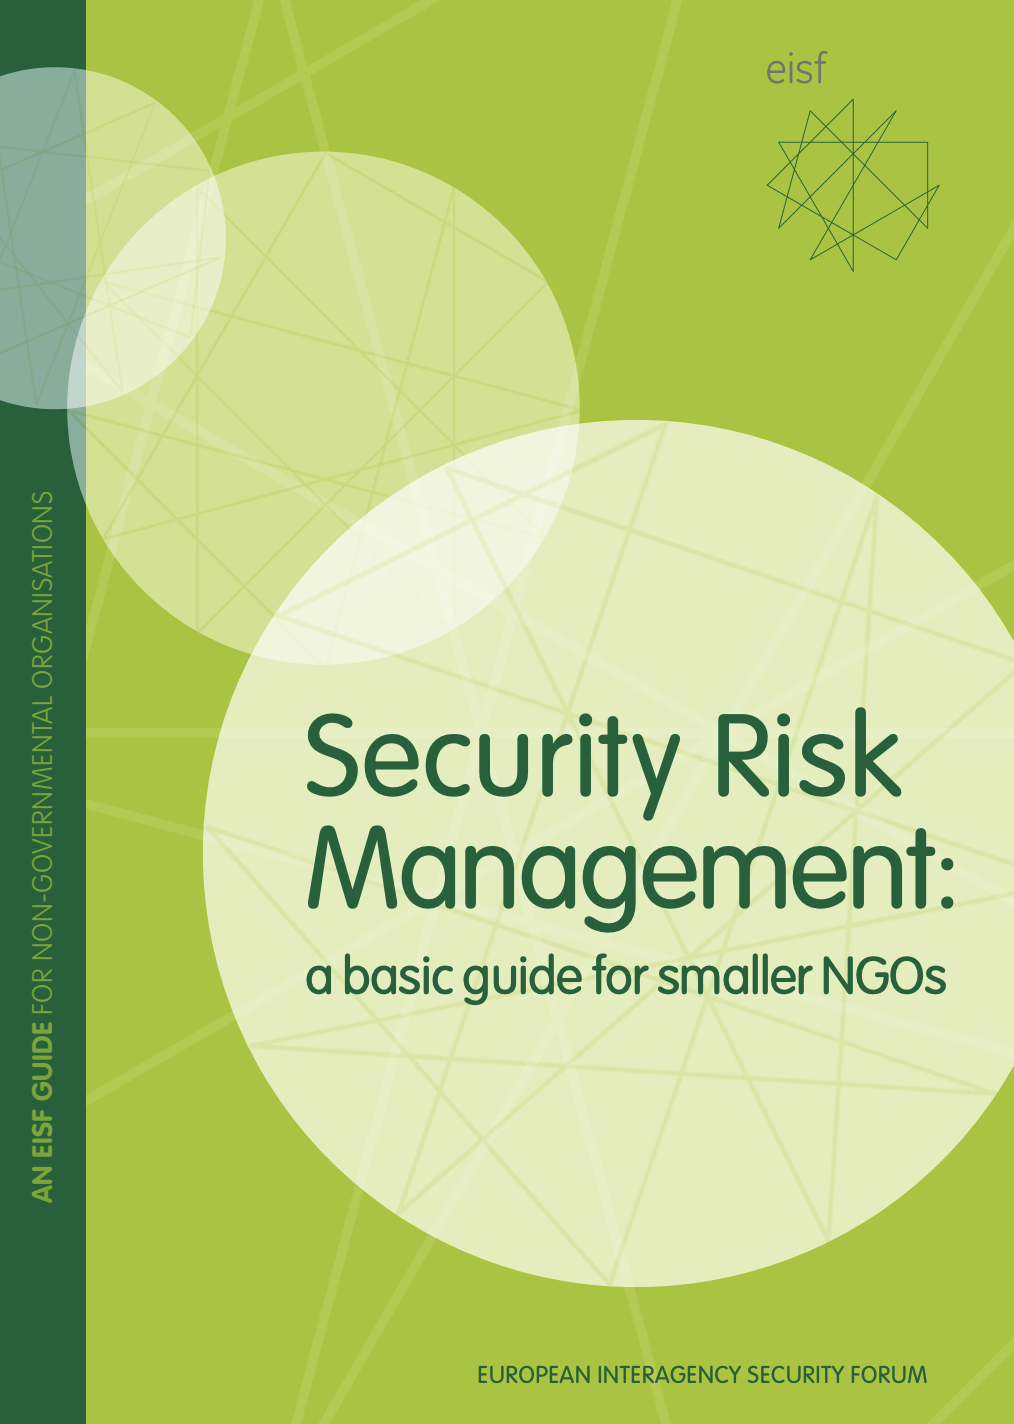 Security Risk Management: a basic guide for smaller NGOs